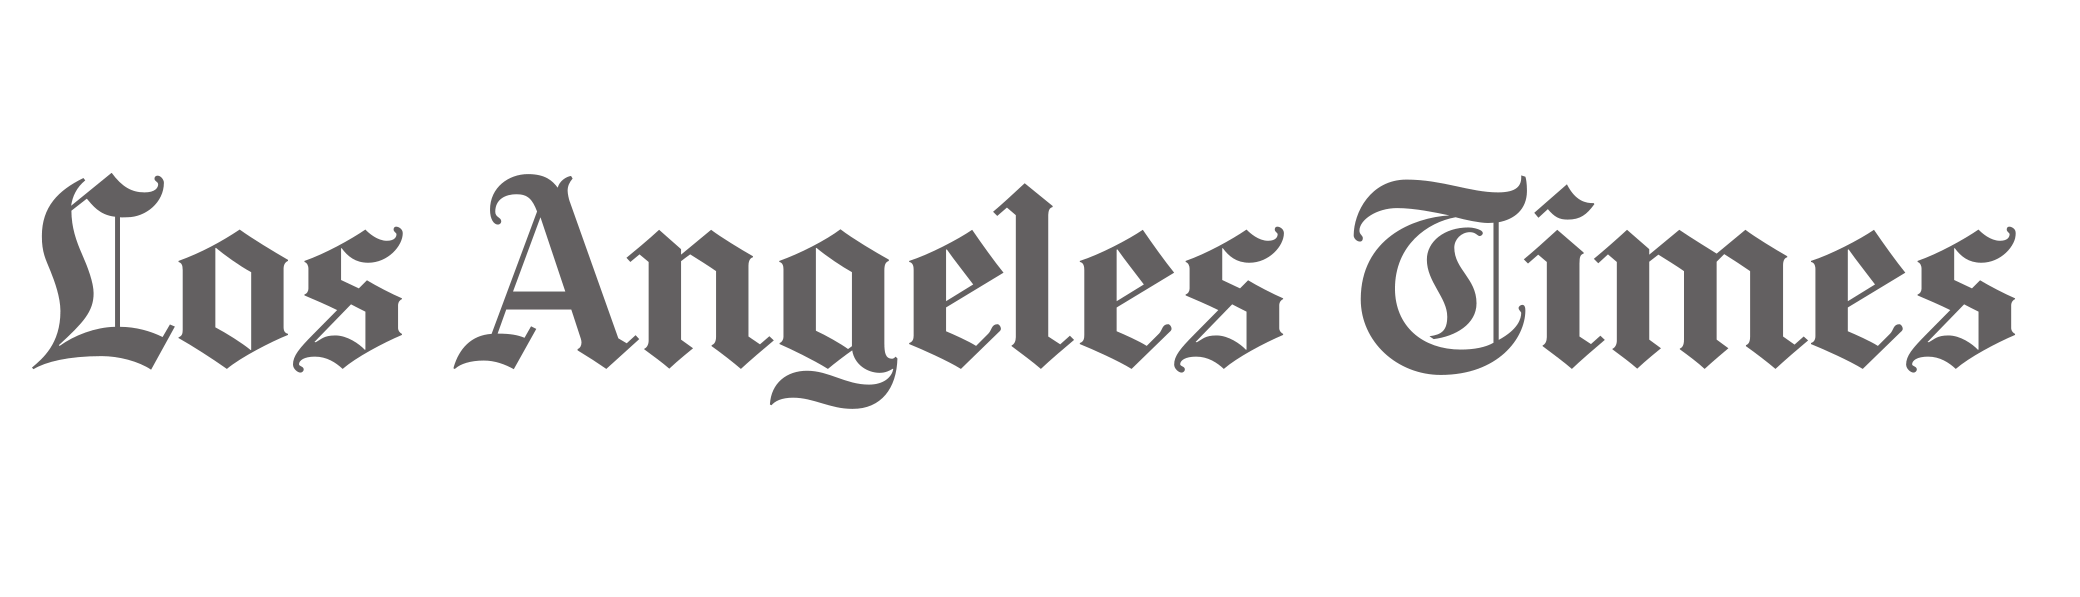 Los-Angeles-Times.png